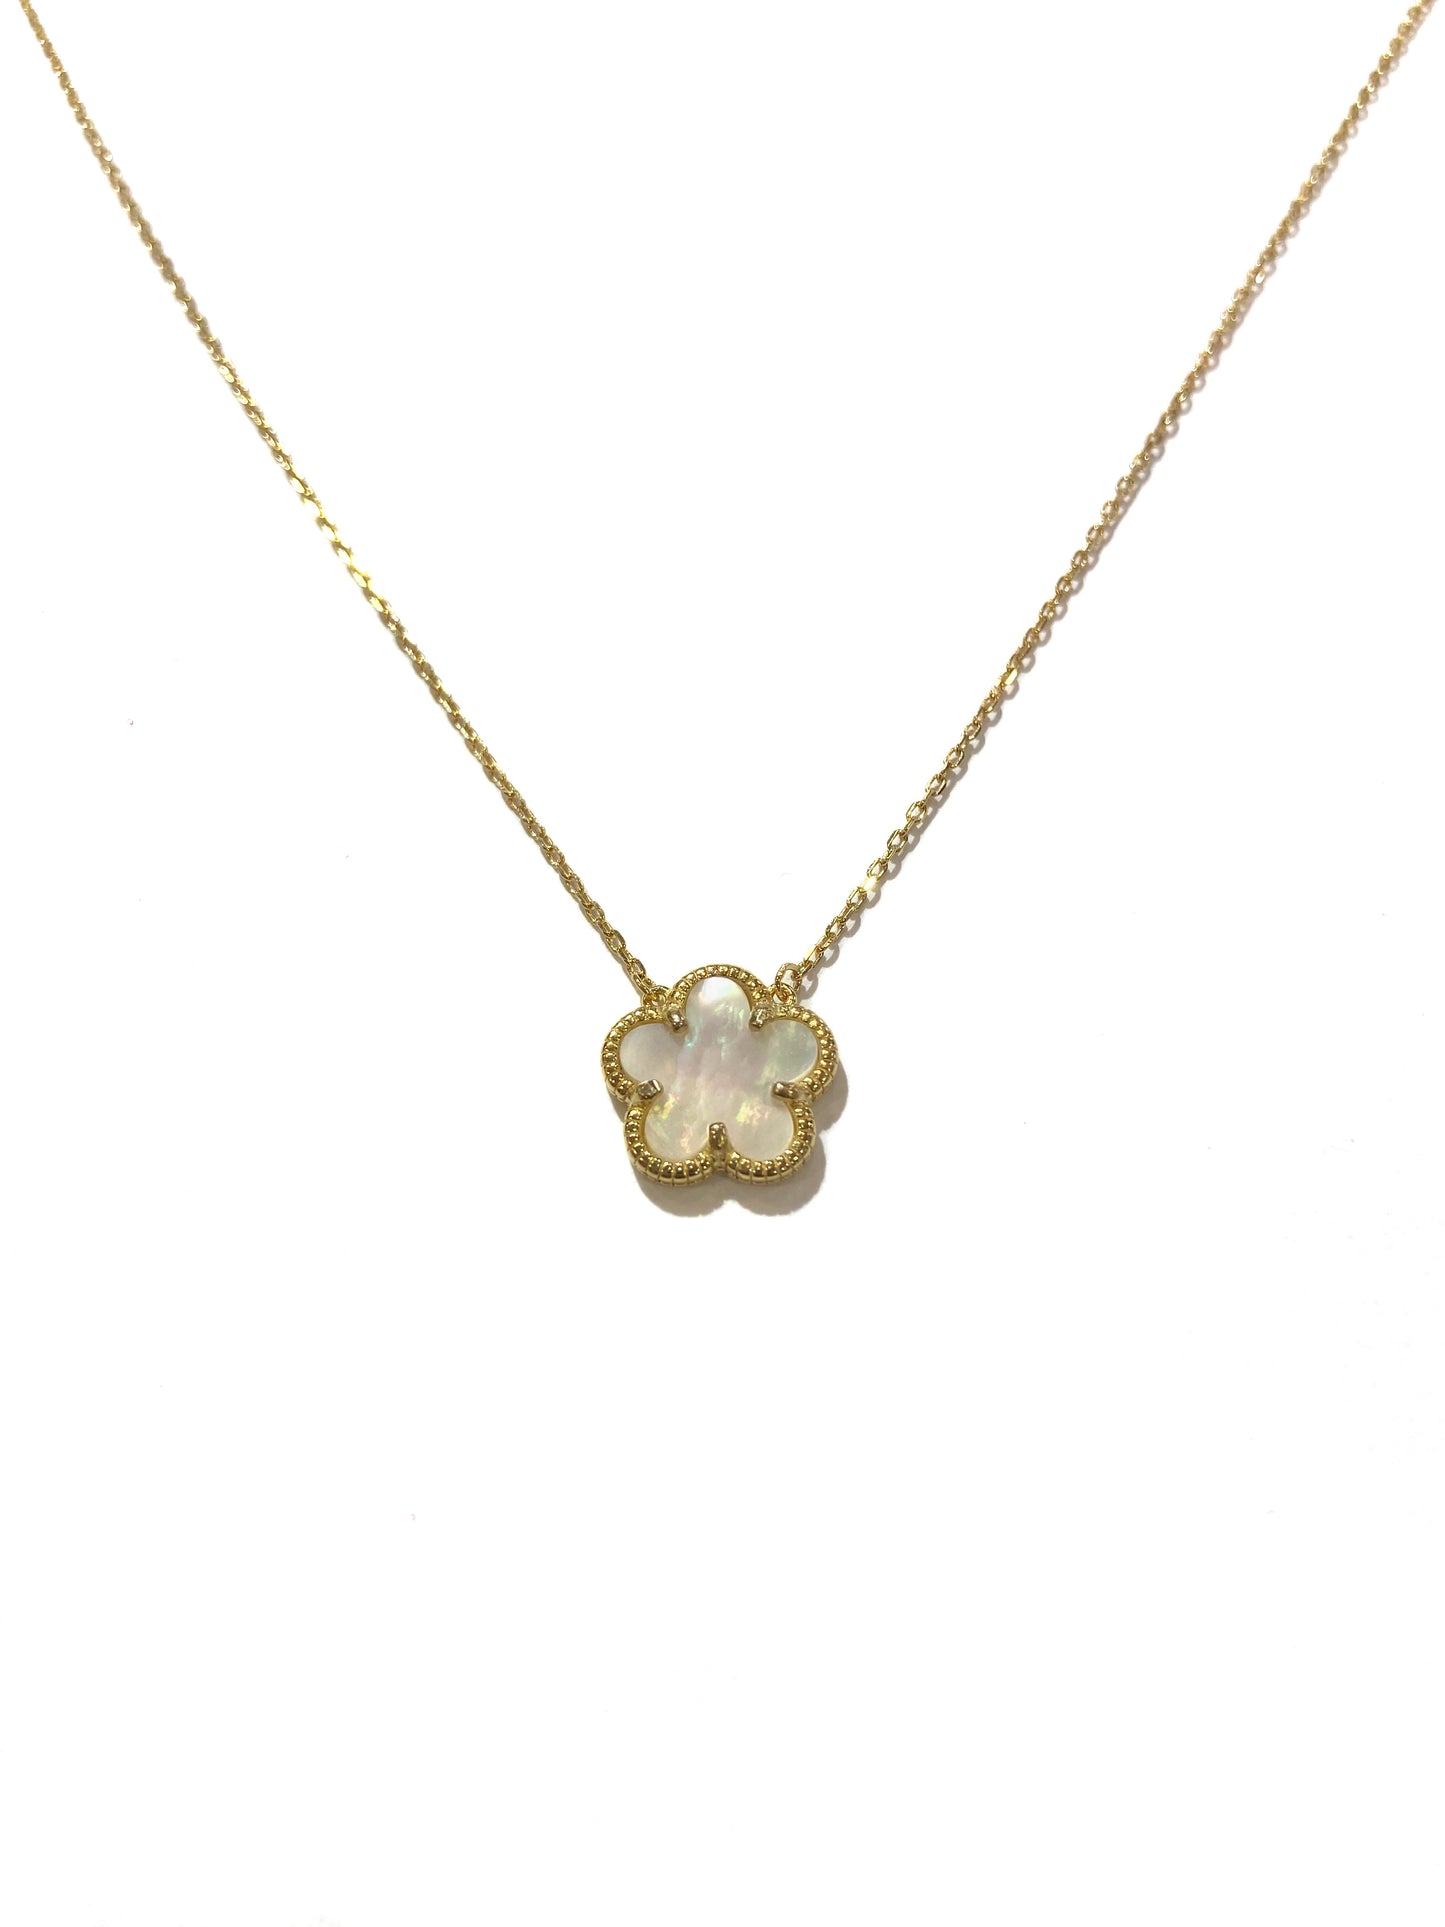 White Clover Necklace